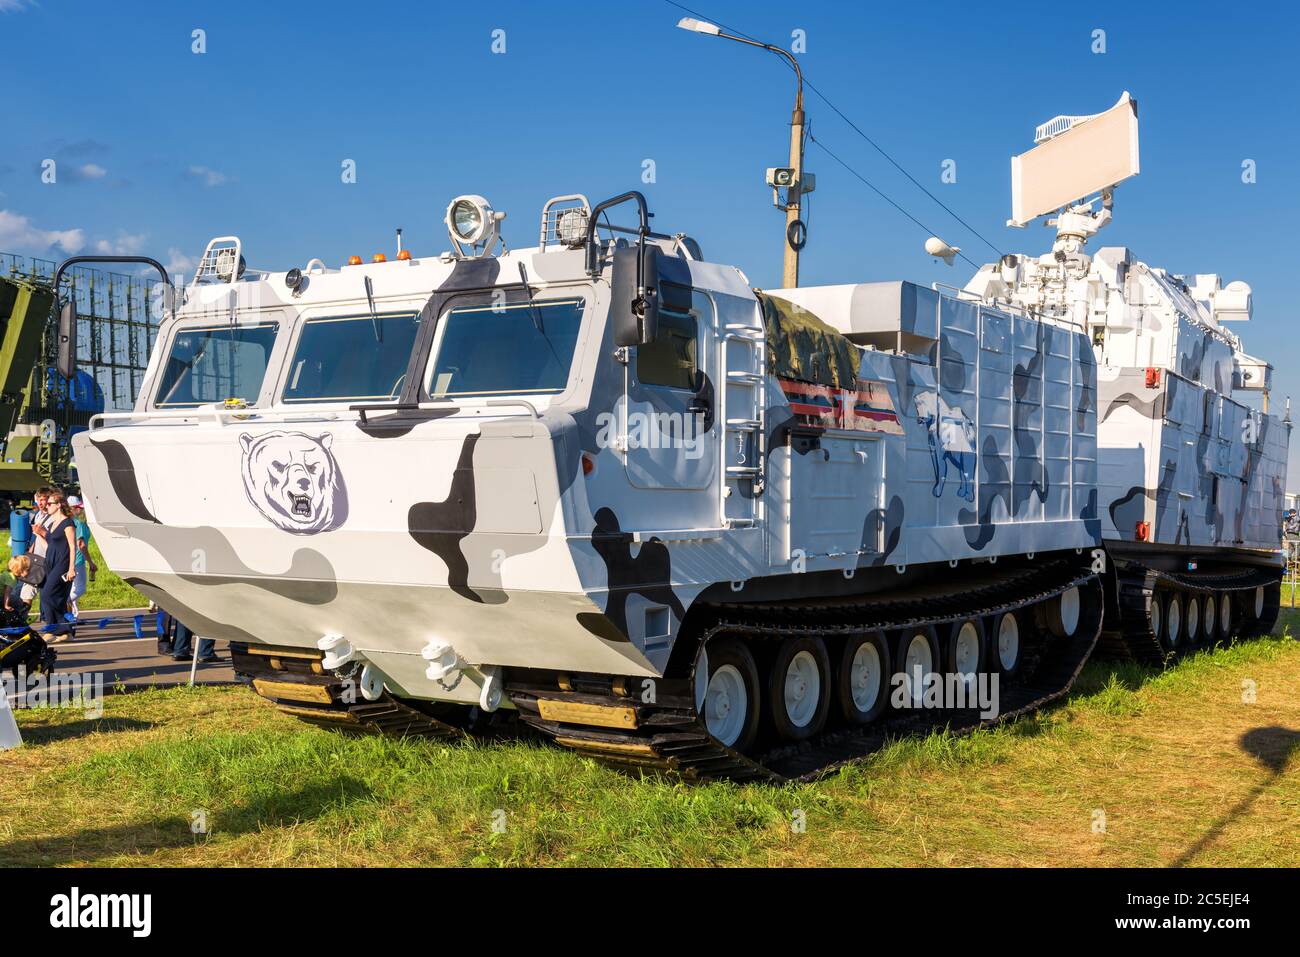 Moscow Region - July 21, 2017: The Tor-M2DT russian air defense missile system at the International Aviation and Space Salon (MAKS). The system is esp Stock Photo